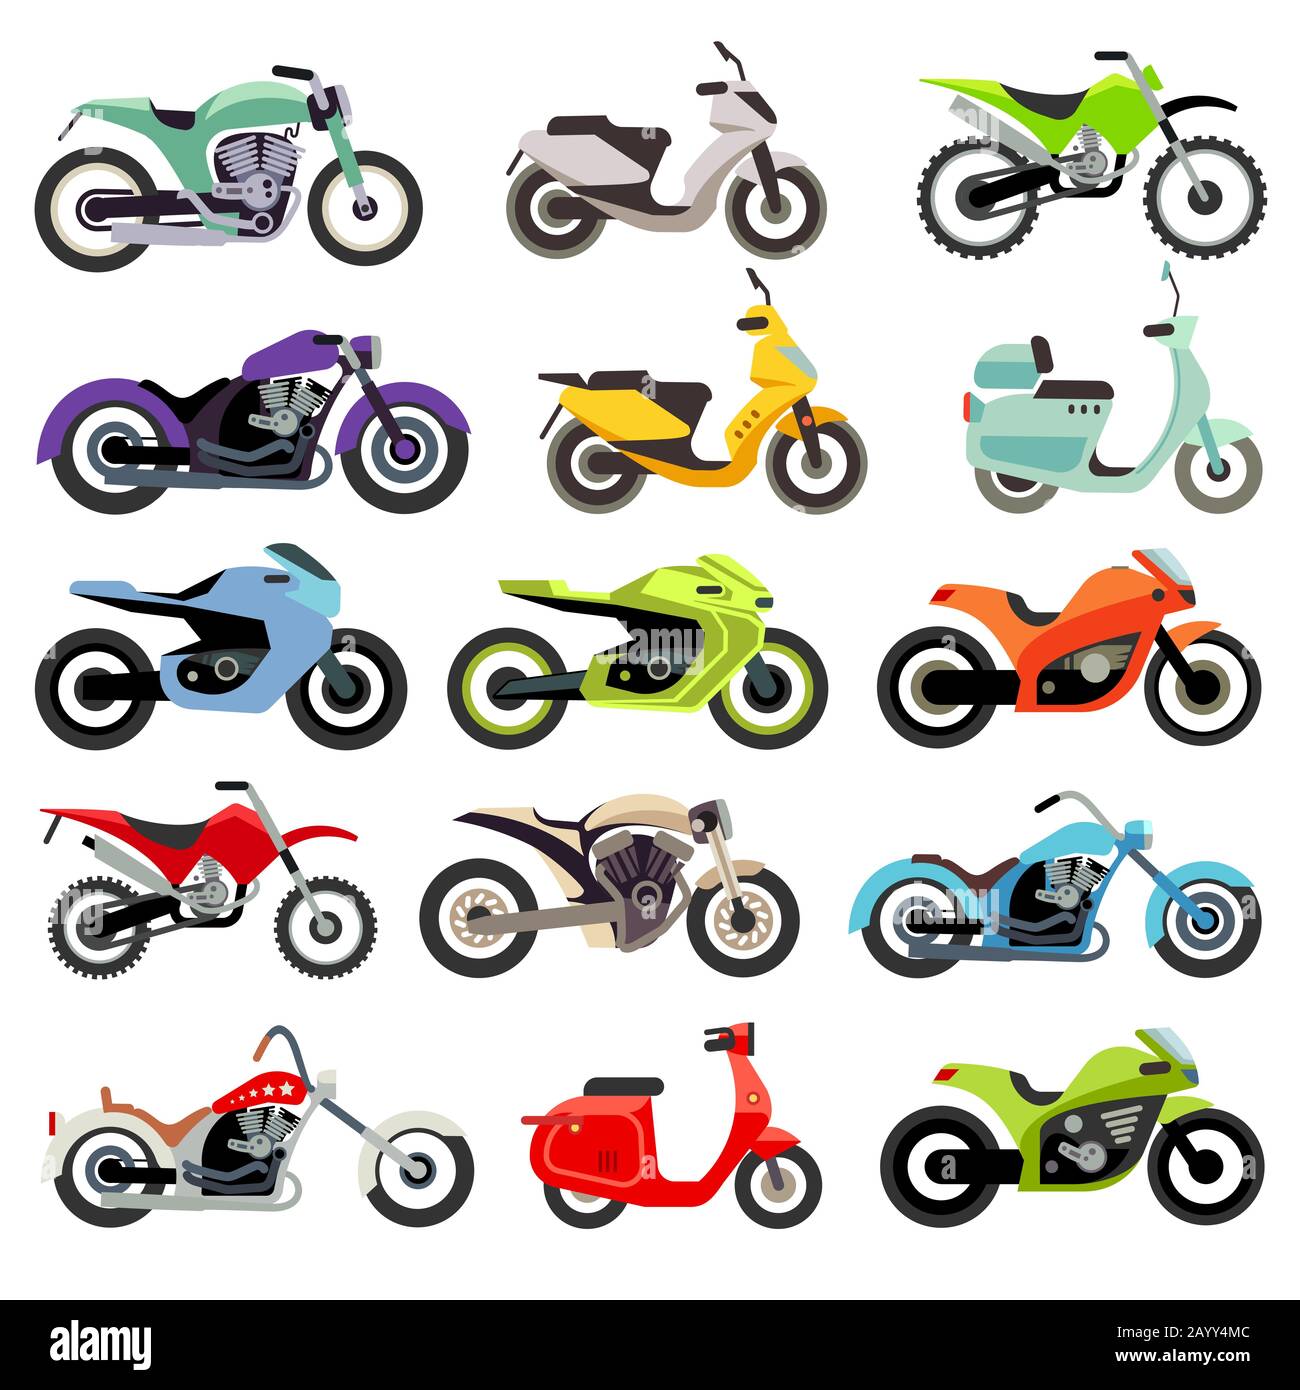 Classic motorcycle motorbike flat vector icons. Set of speed motorcycle, illustration set of motobike for transportation Stock Vector